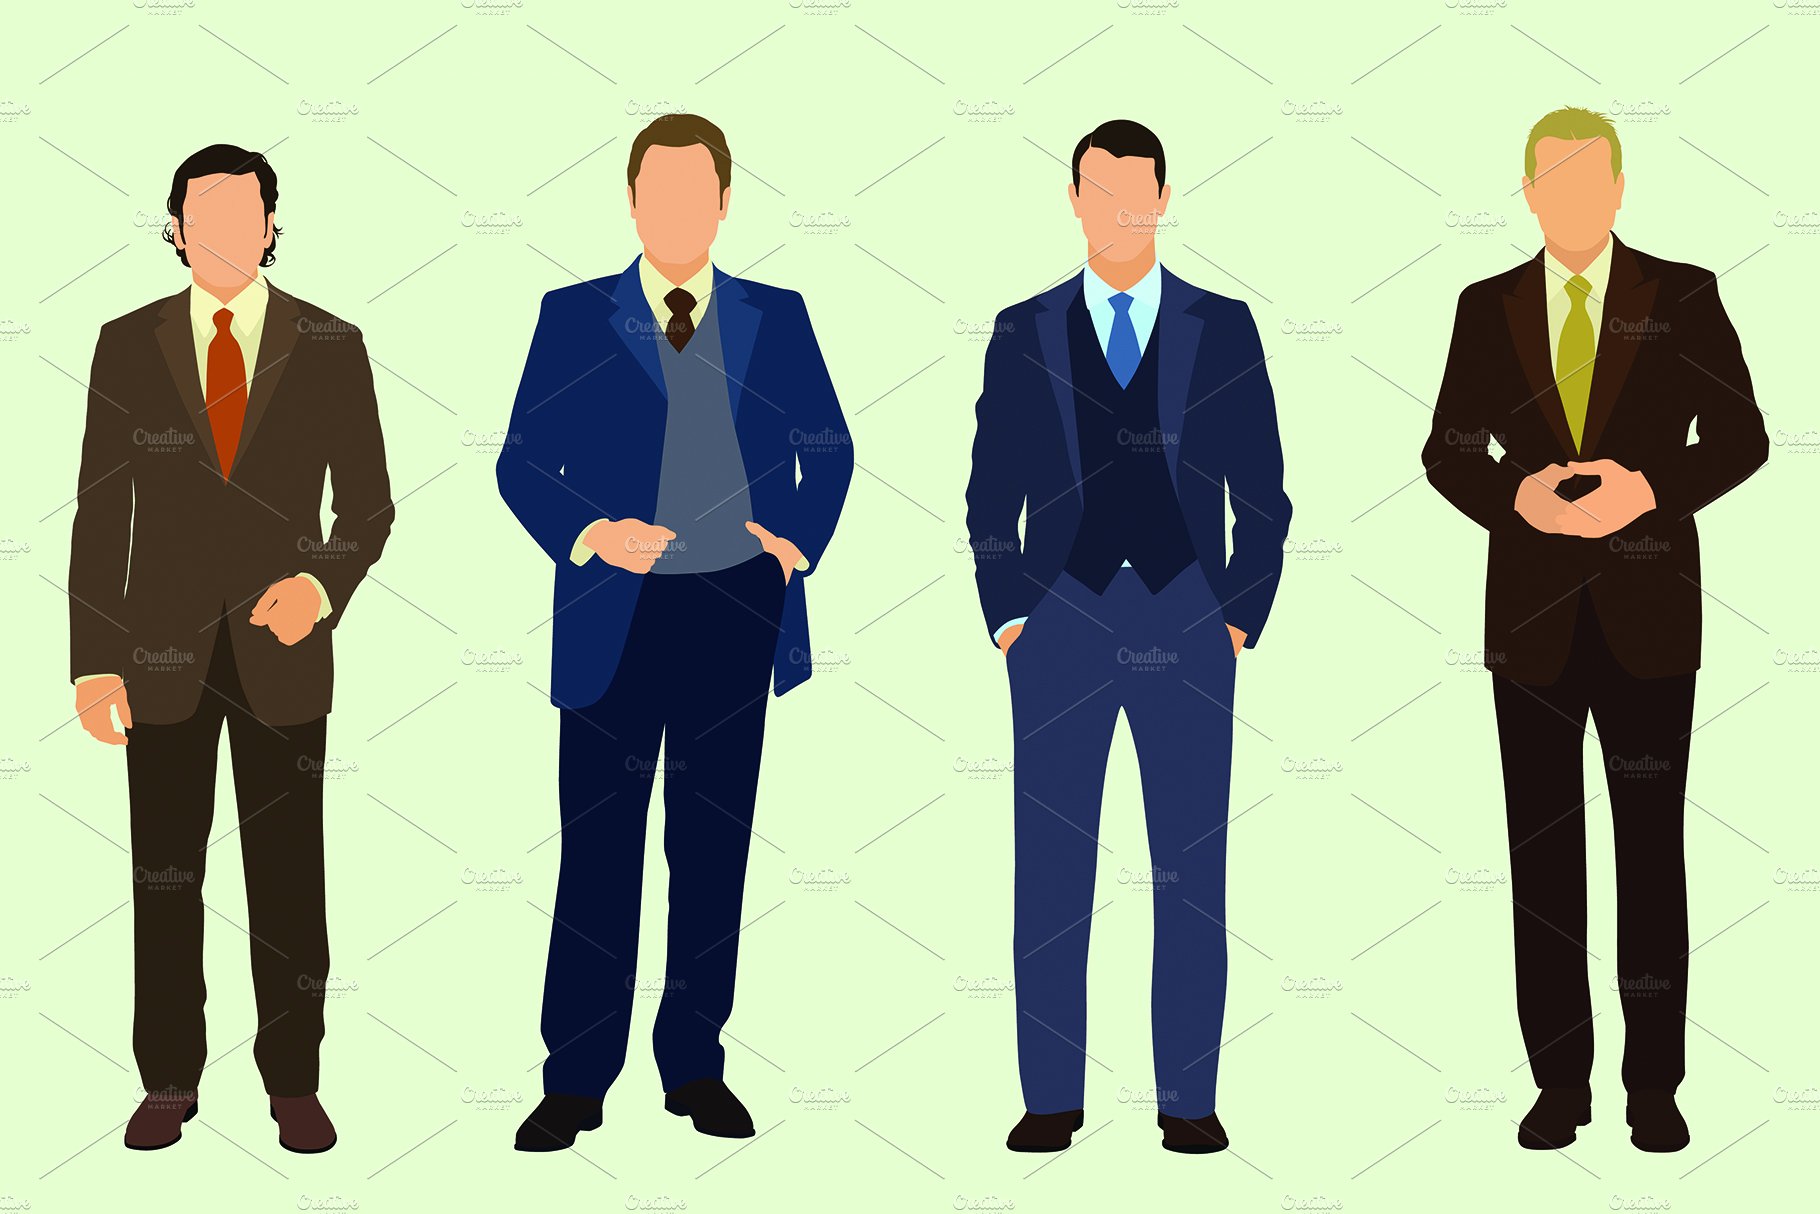 Stylish Well-dressed Businessmen cover image.